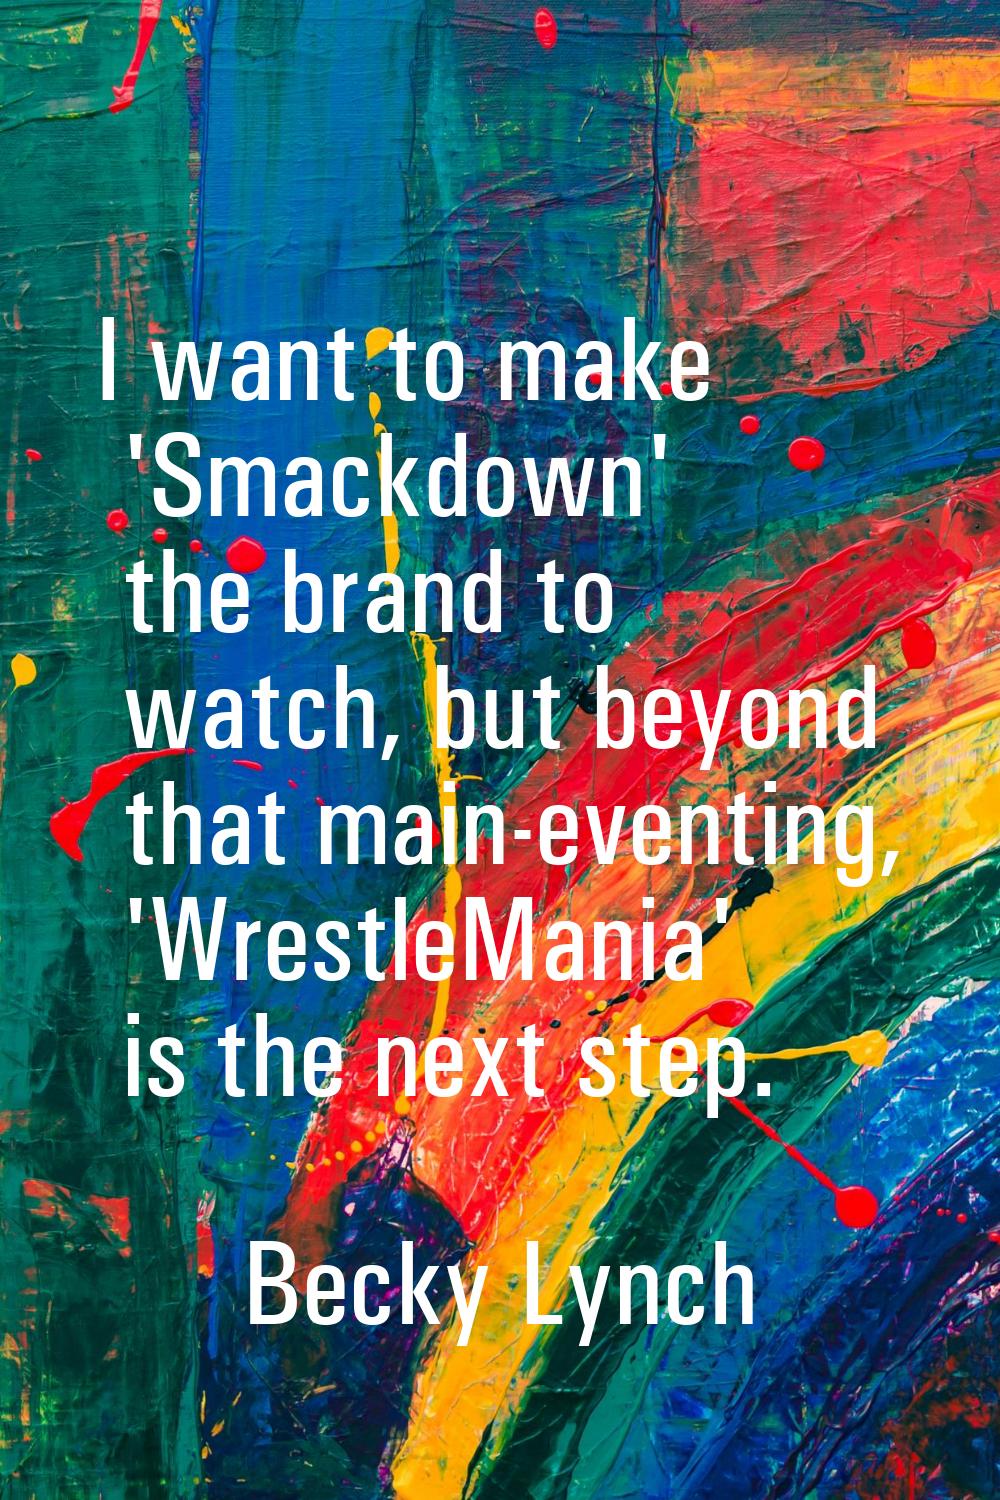 I want to make 'Smackdown' the brand to watch, but beyond that main-eventing, 'WrestleMania' is the